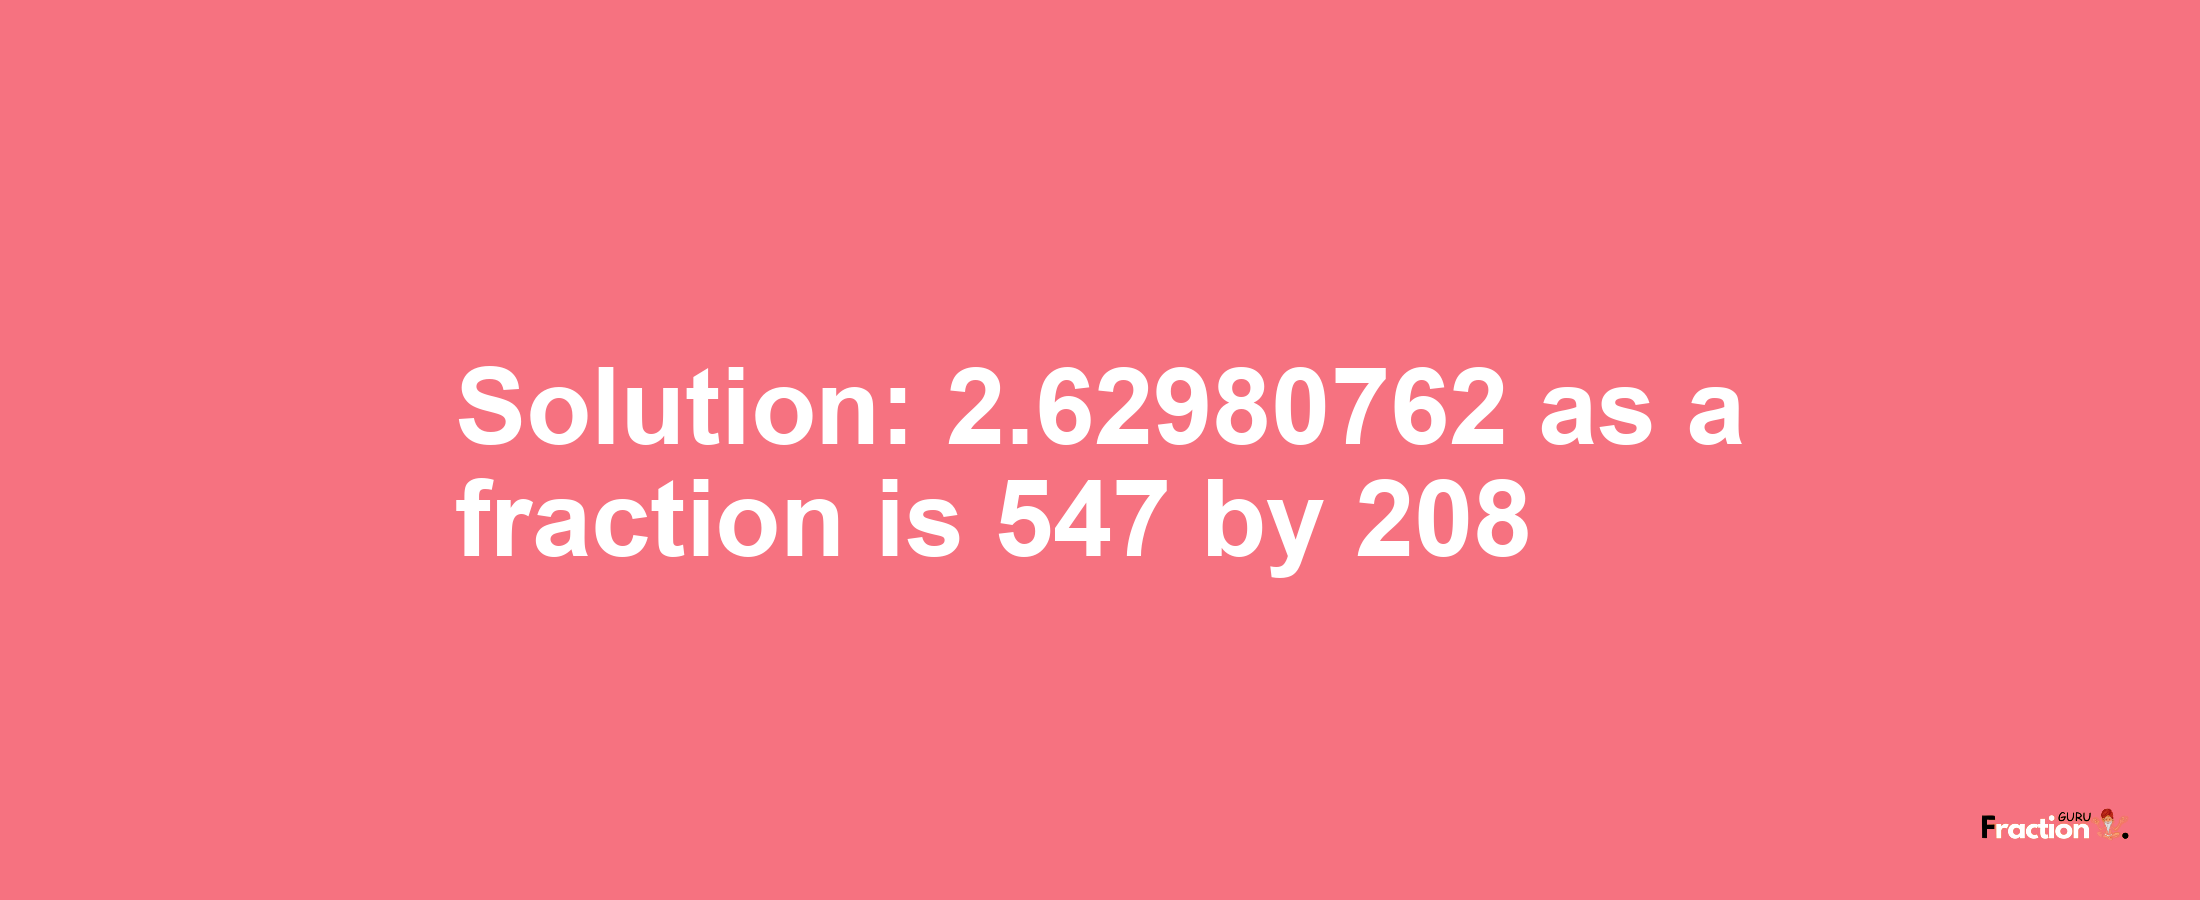 Solution:2.62980762 as a fraction is 547/208